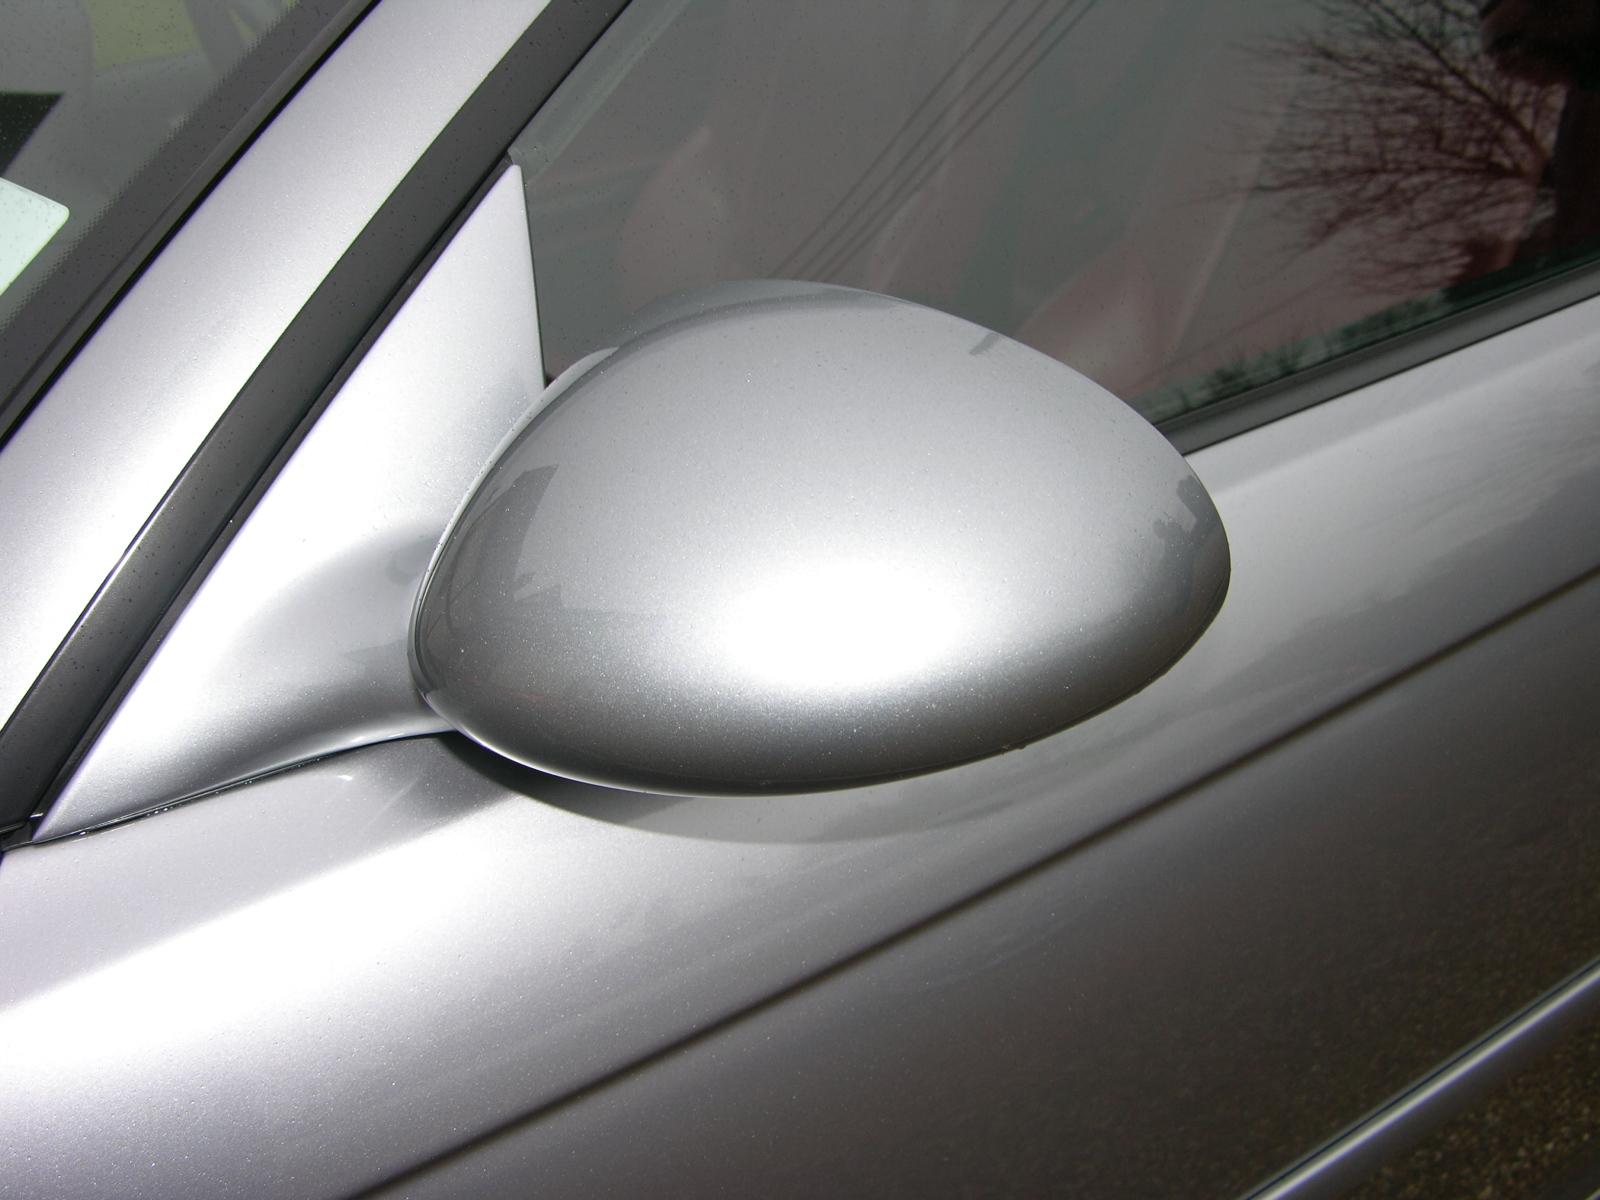 a silver car's side view mirror on the side of a vehicle